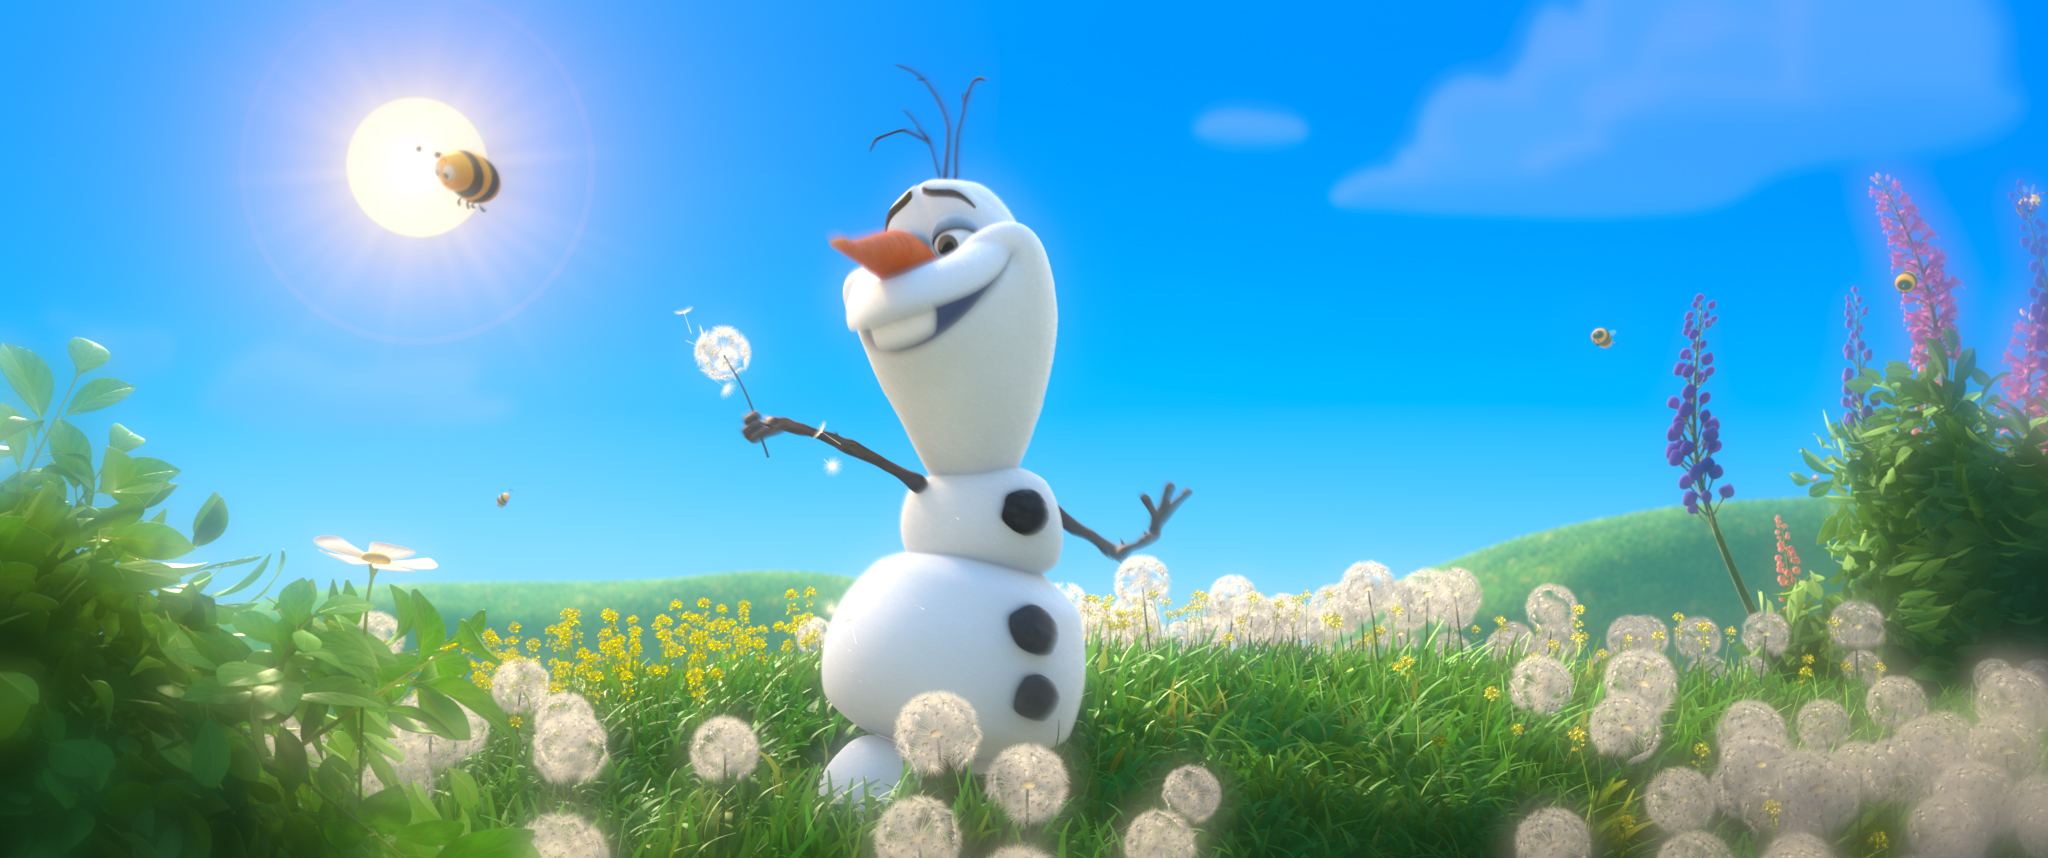 Disney’s ‘Frozen’ and why we won’t ‘Let It Go’